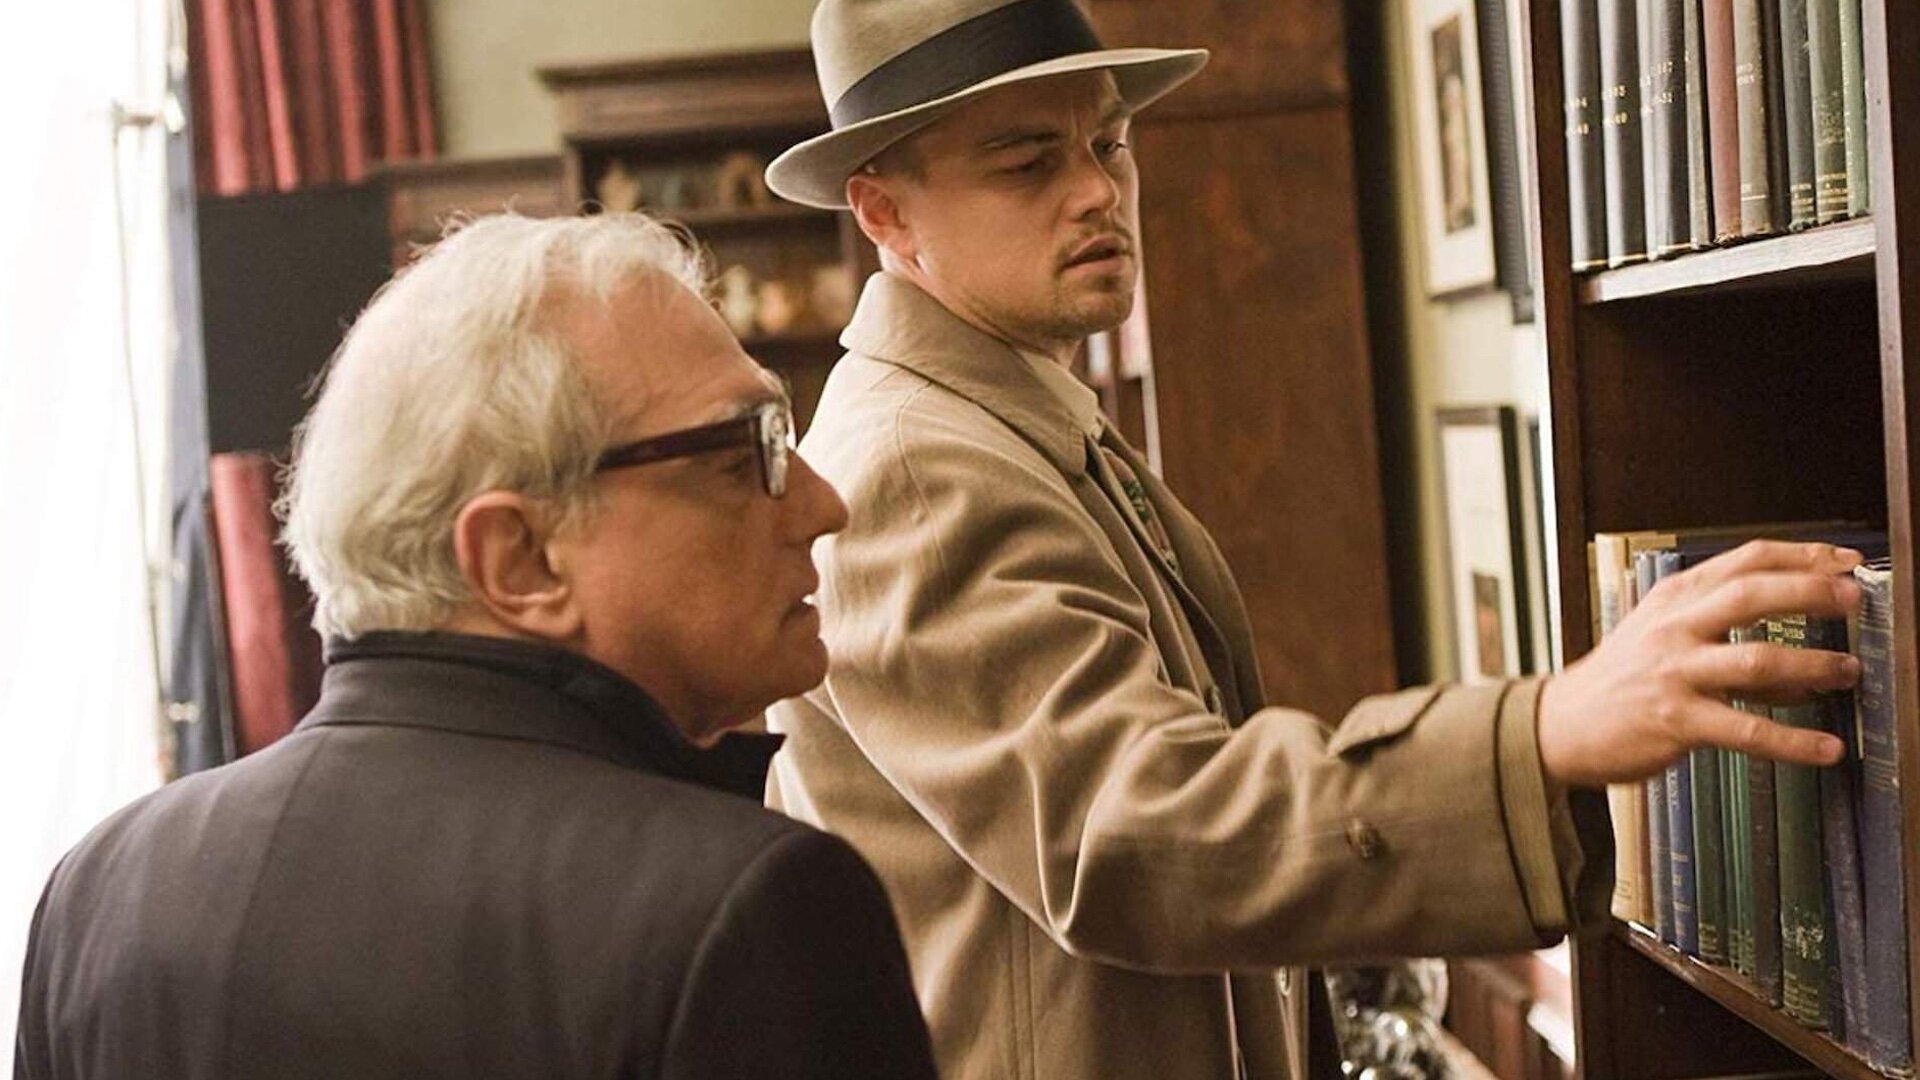 DiCaprio will portray Ernest Burkhart, the father of a family at the center of the killings. DiCaprio has previously collaborated with Scorsese on Gangs of New York, The Aviator, The Departed, Shutter Island, and The Wolf of Wall Street.